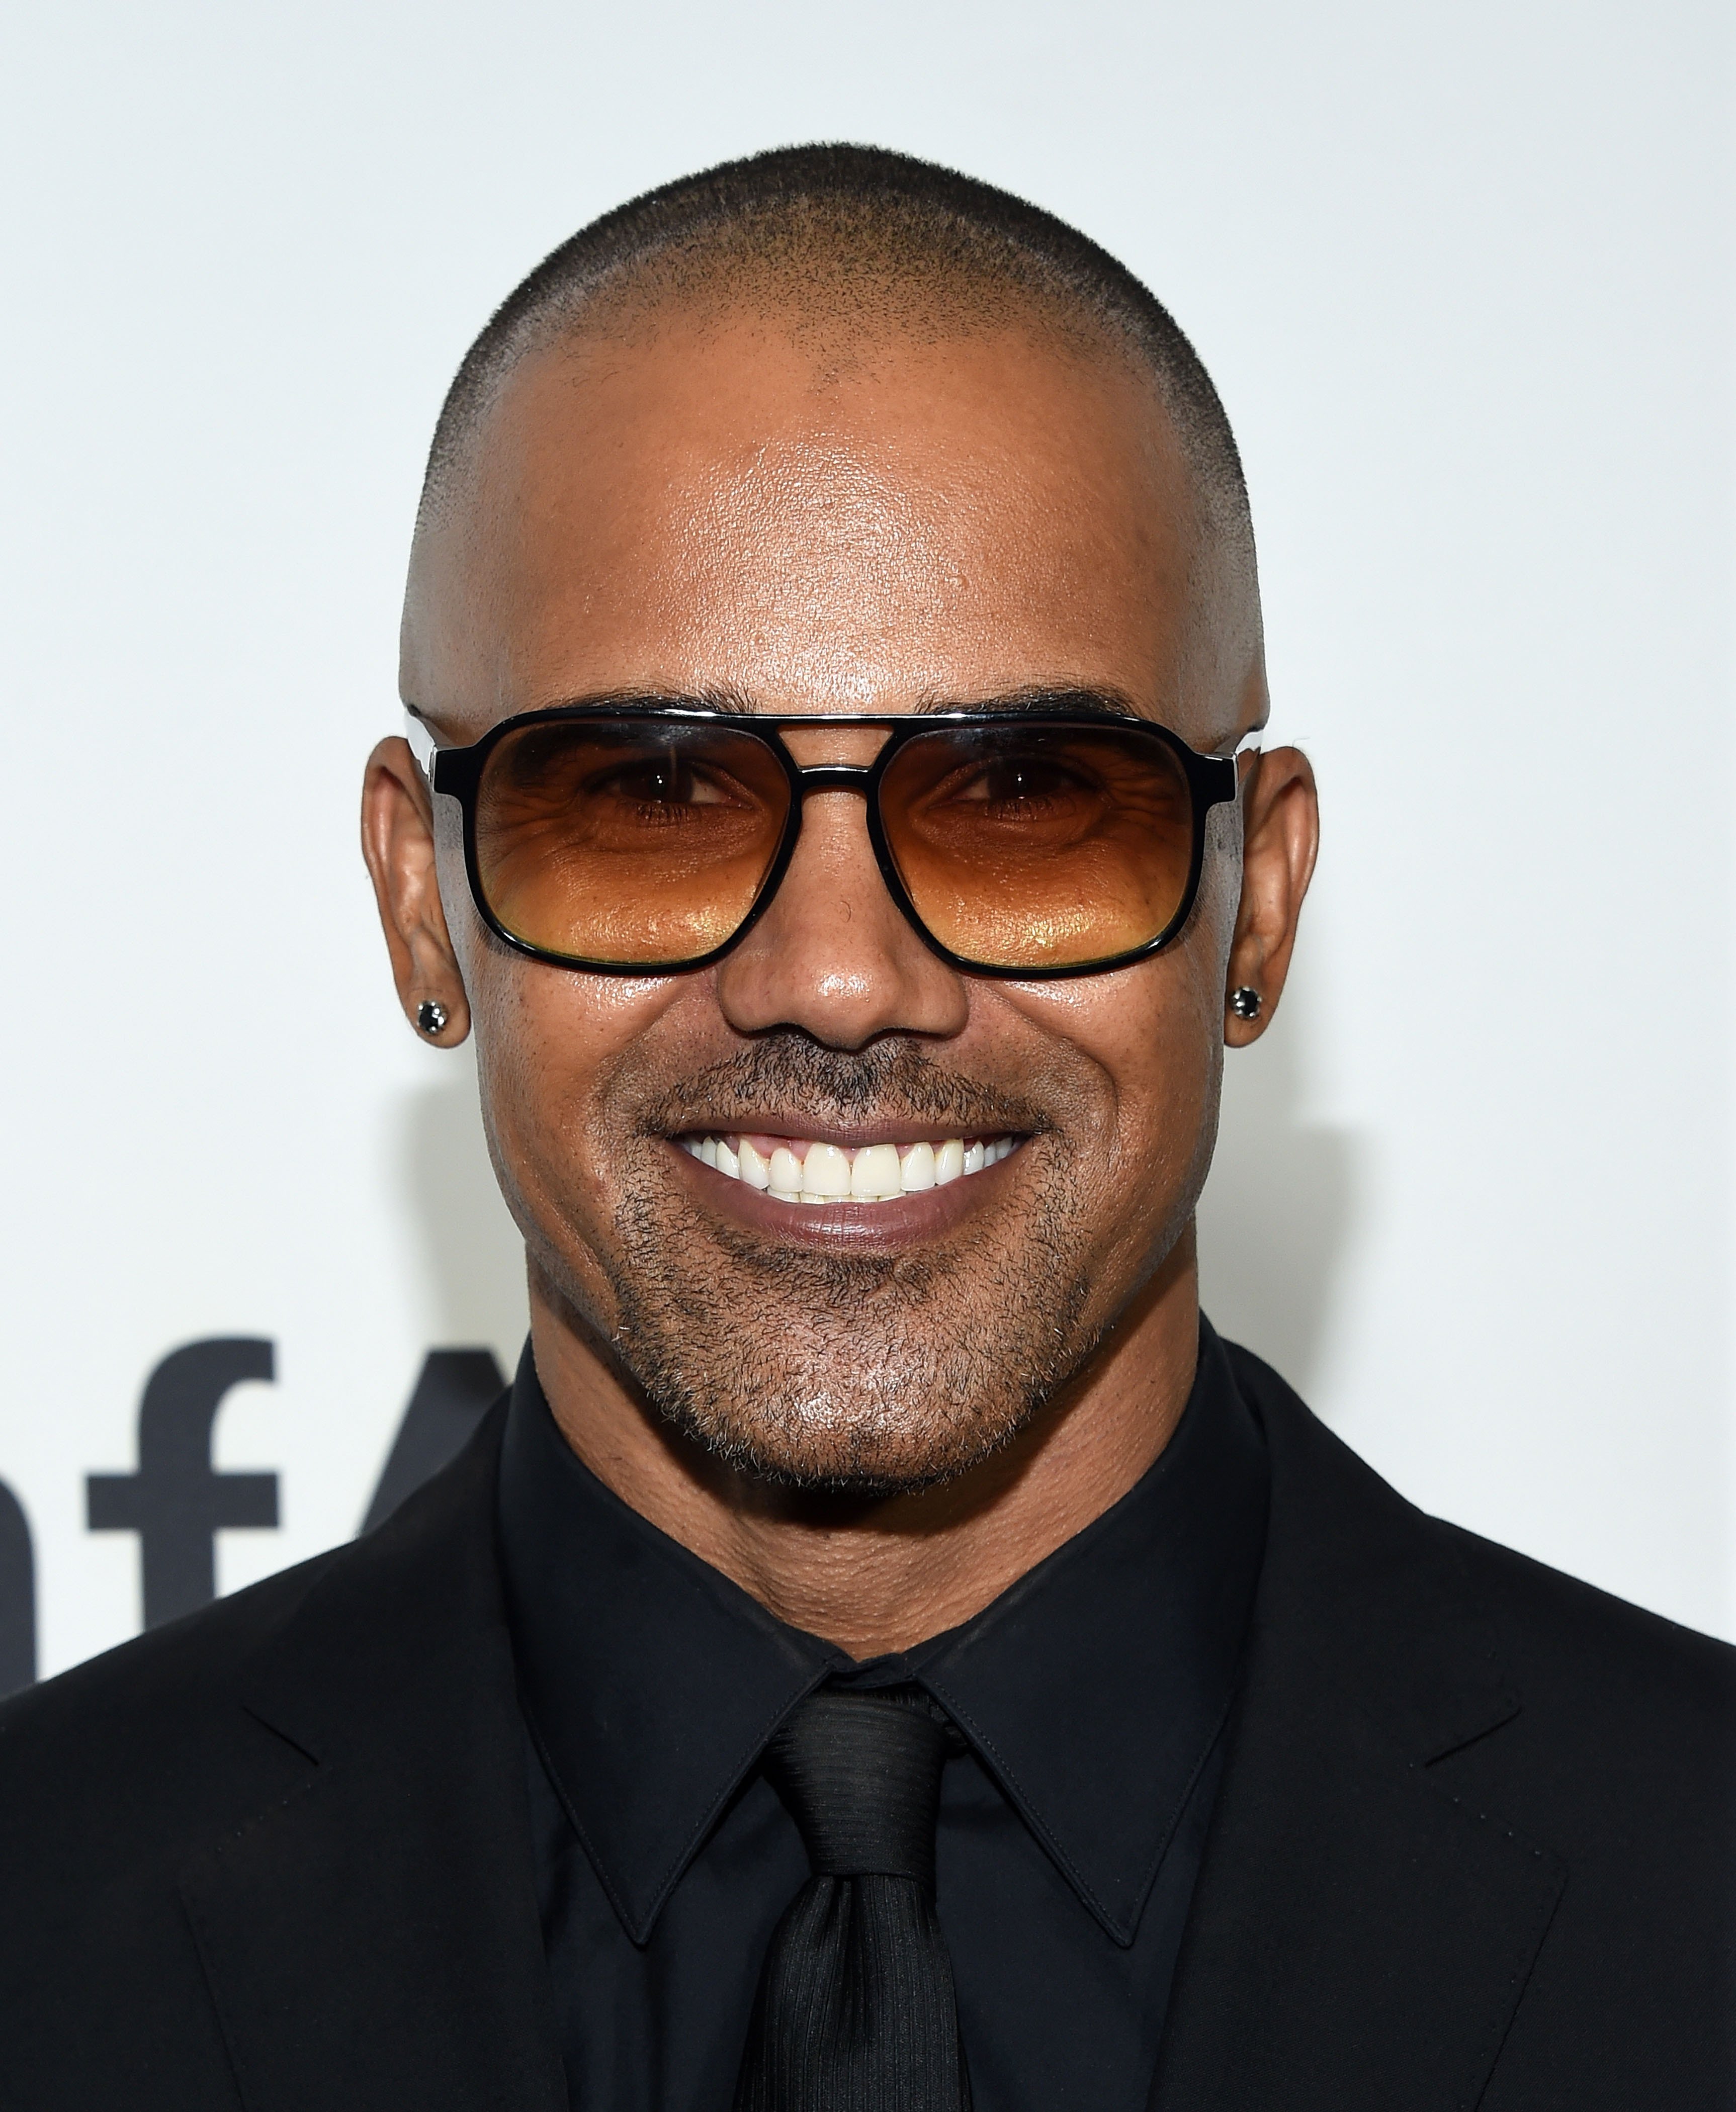 Shemar Moore at amfAR's Inspiration gala, Los Angeles on October 27, 2016 in Hollywood, California |  Photo: Getty Images